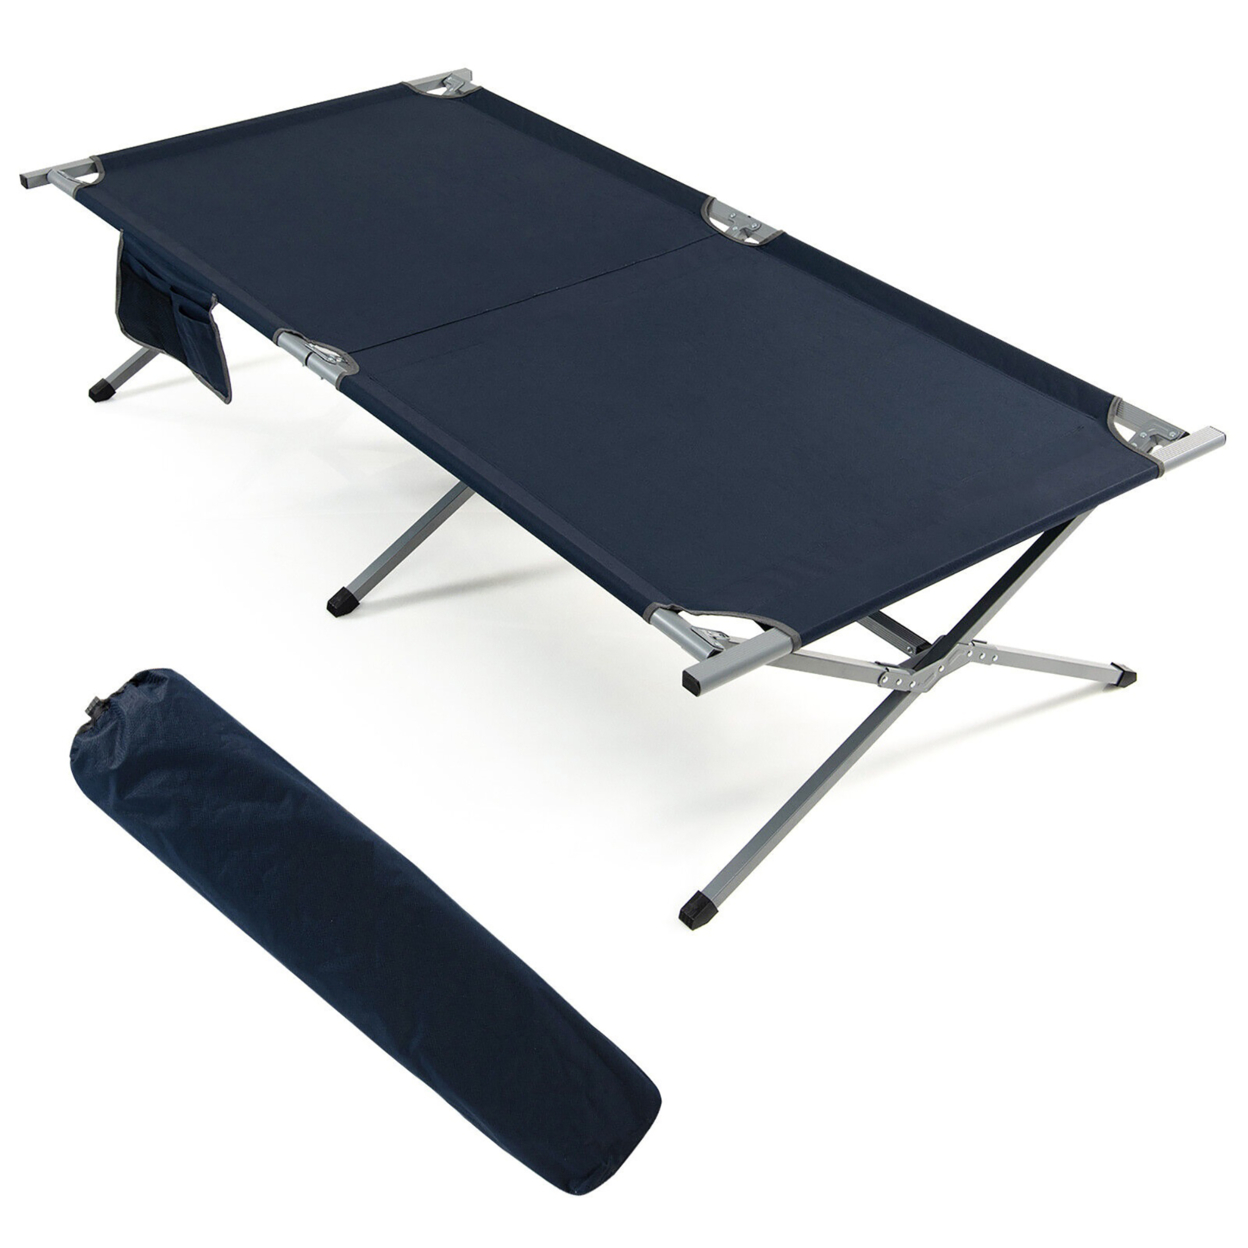 Gymax Folding Camping Bed Extra Wide Military Cot Up To 330Lbs W/ Carry Bag & Storage